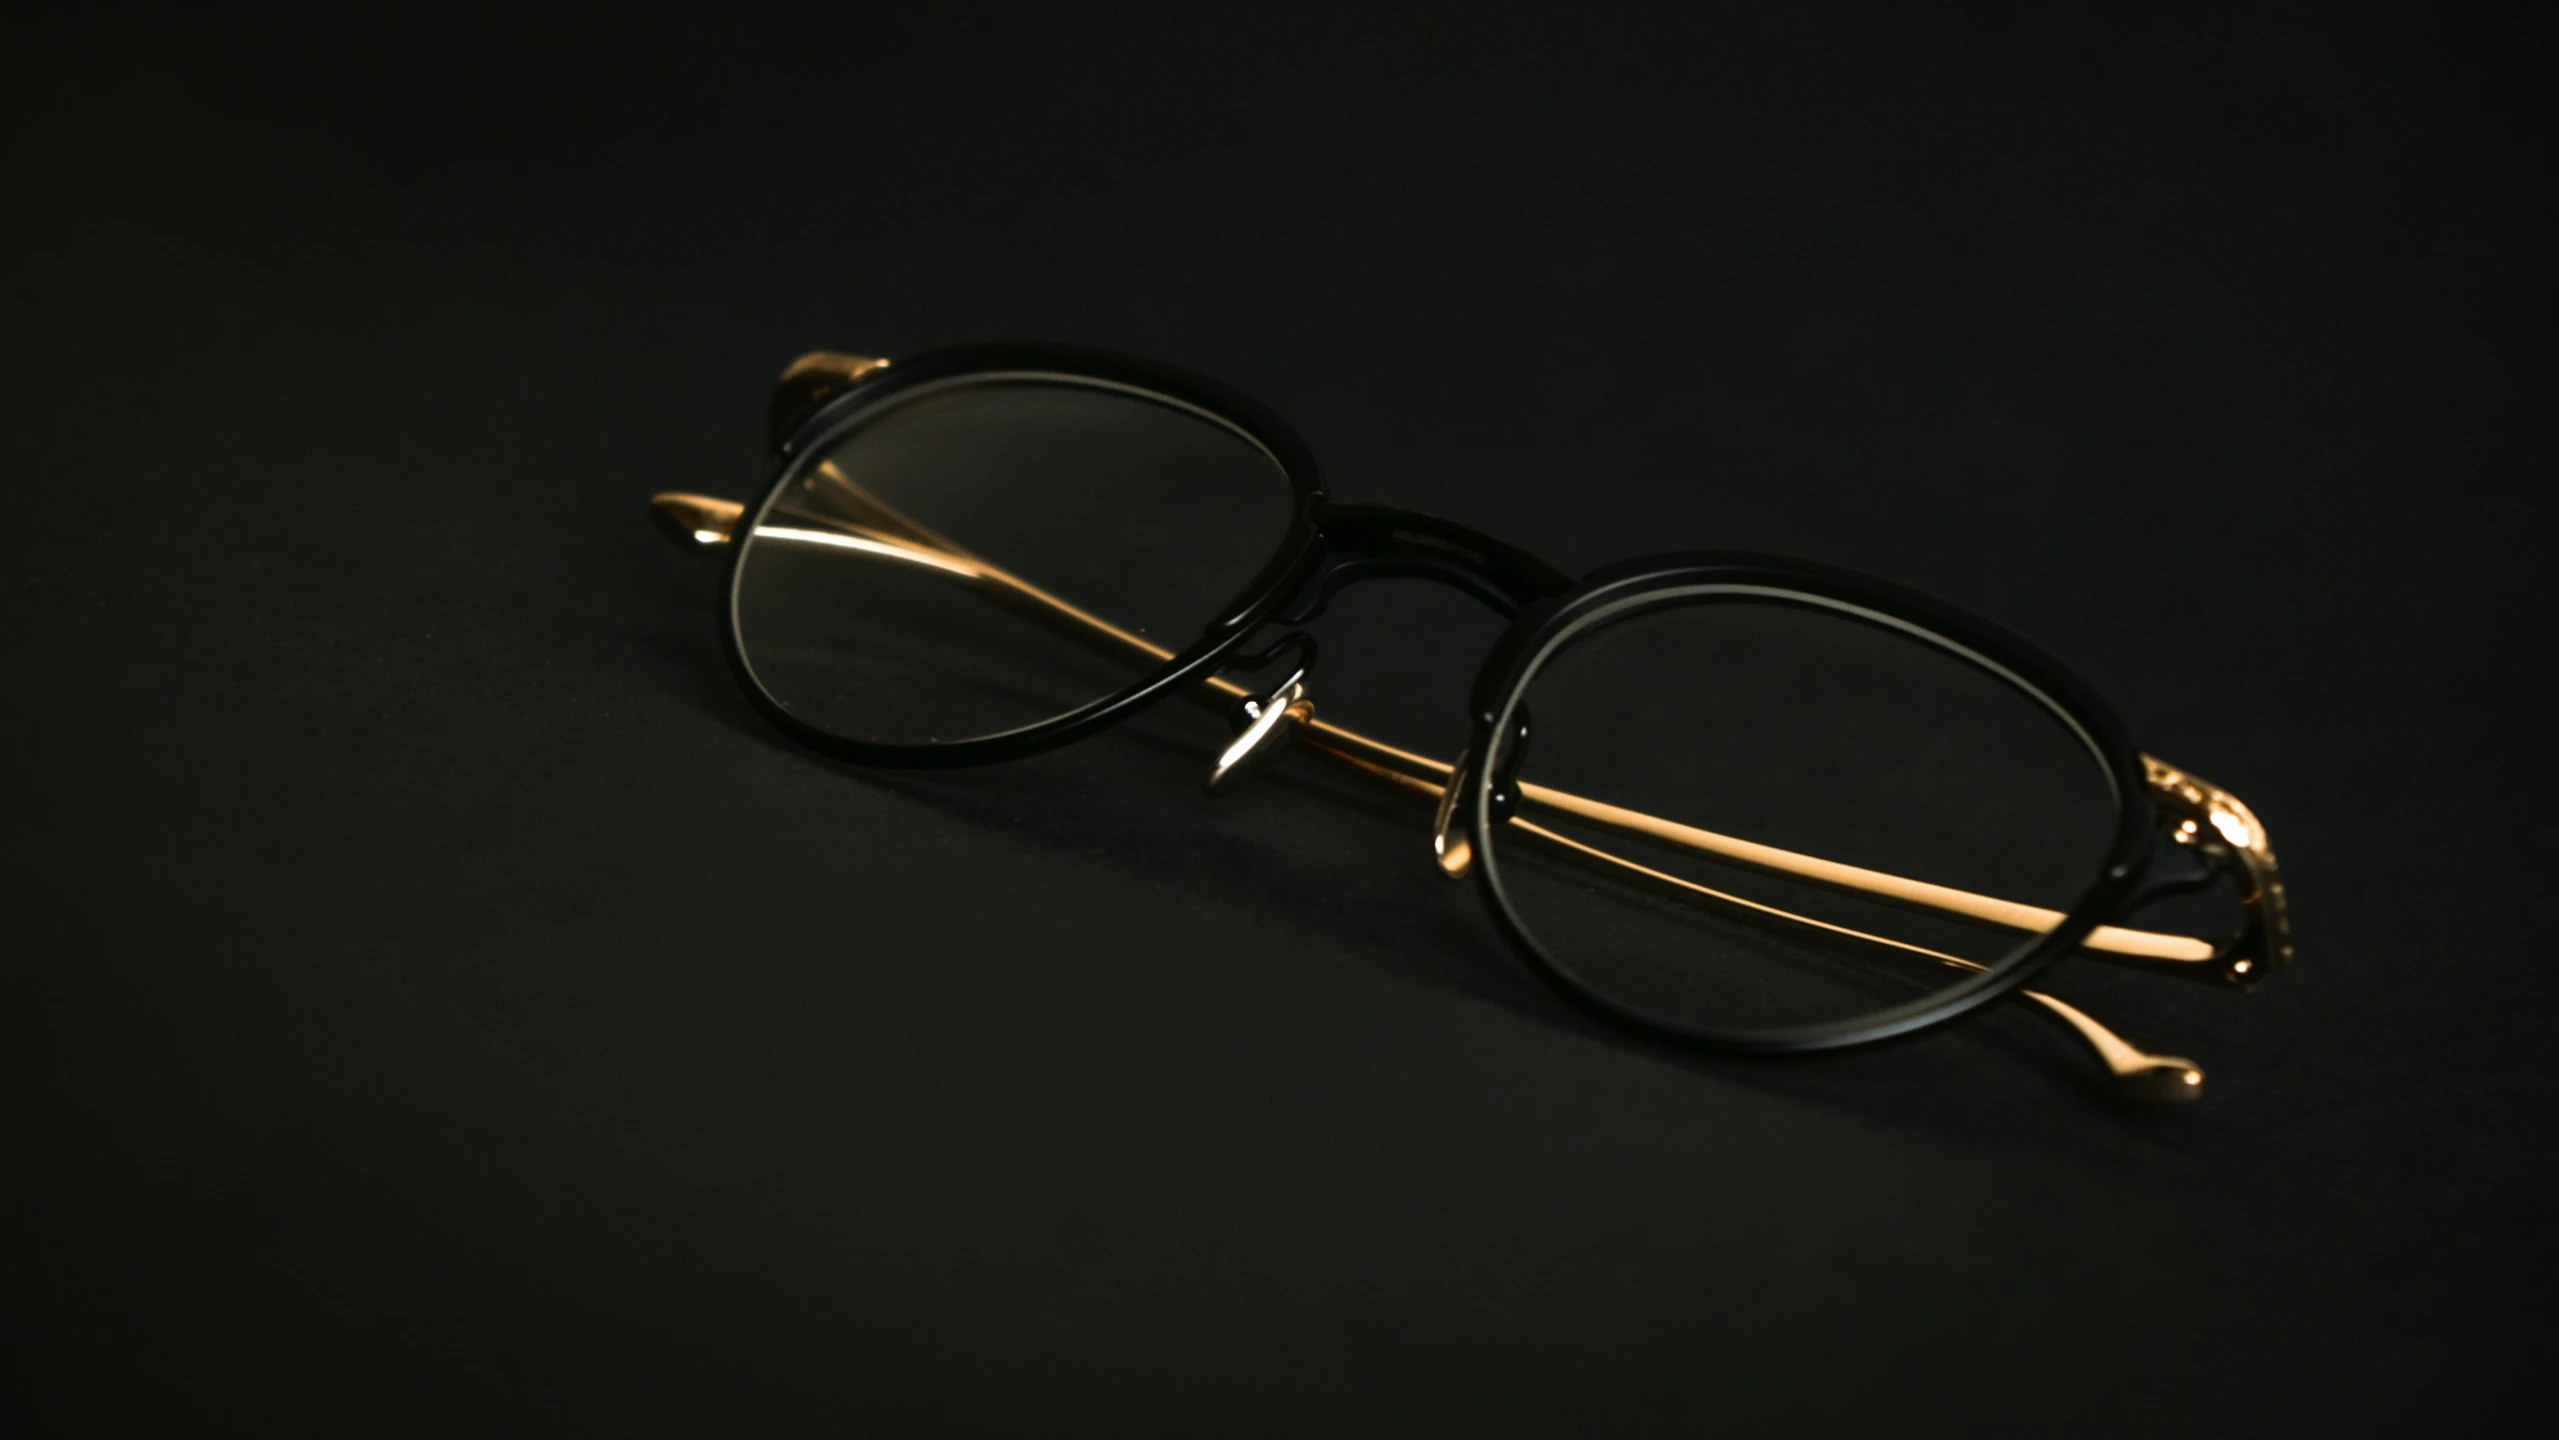 the black frame of a pair of glasses with gold accents